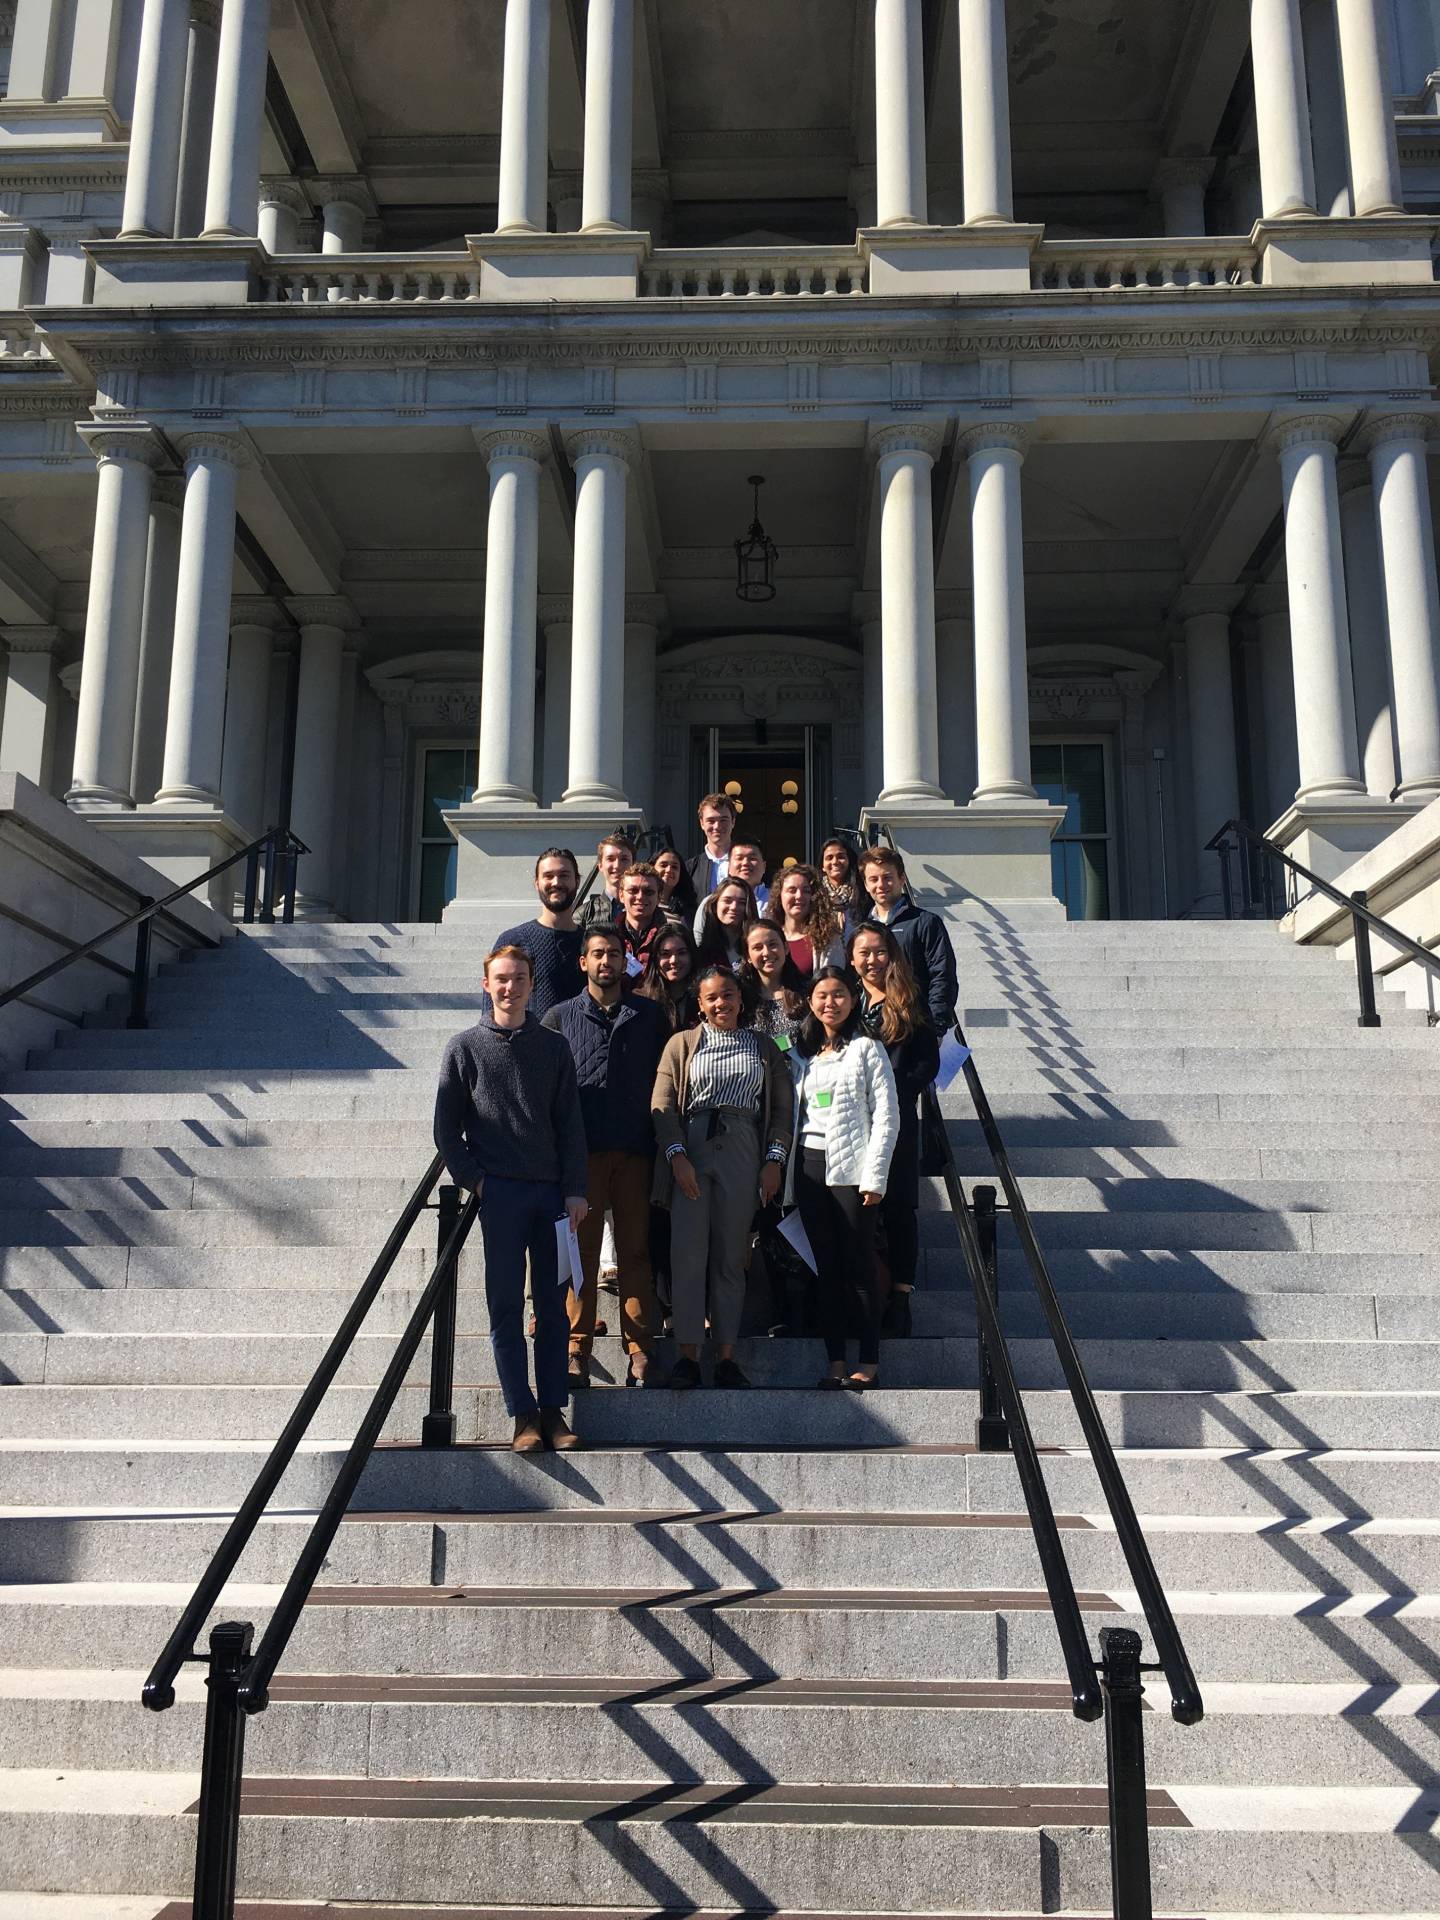 A group of students pose for a photo on the steps of the Eisenhower Executive Office Building in Washington DC